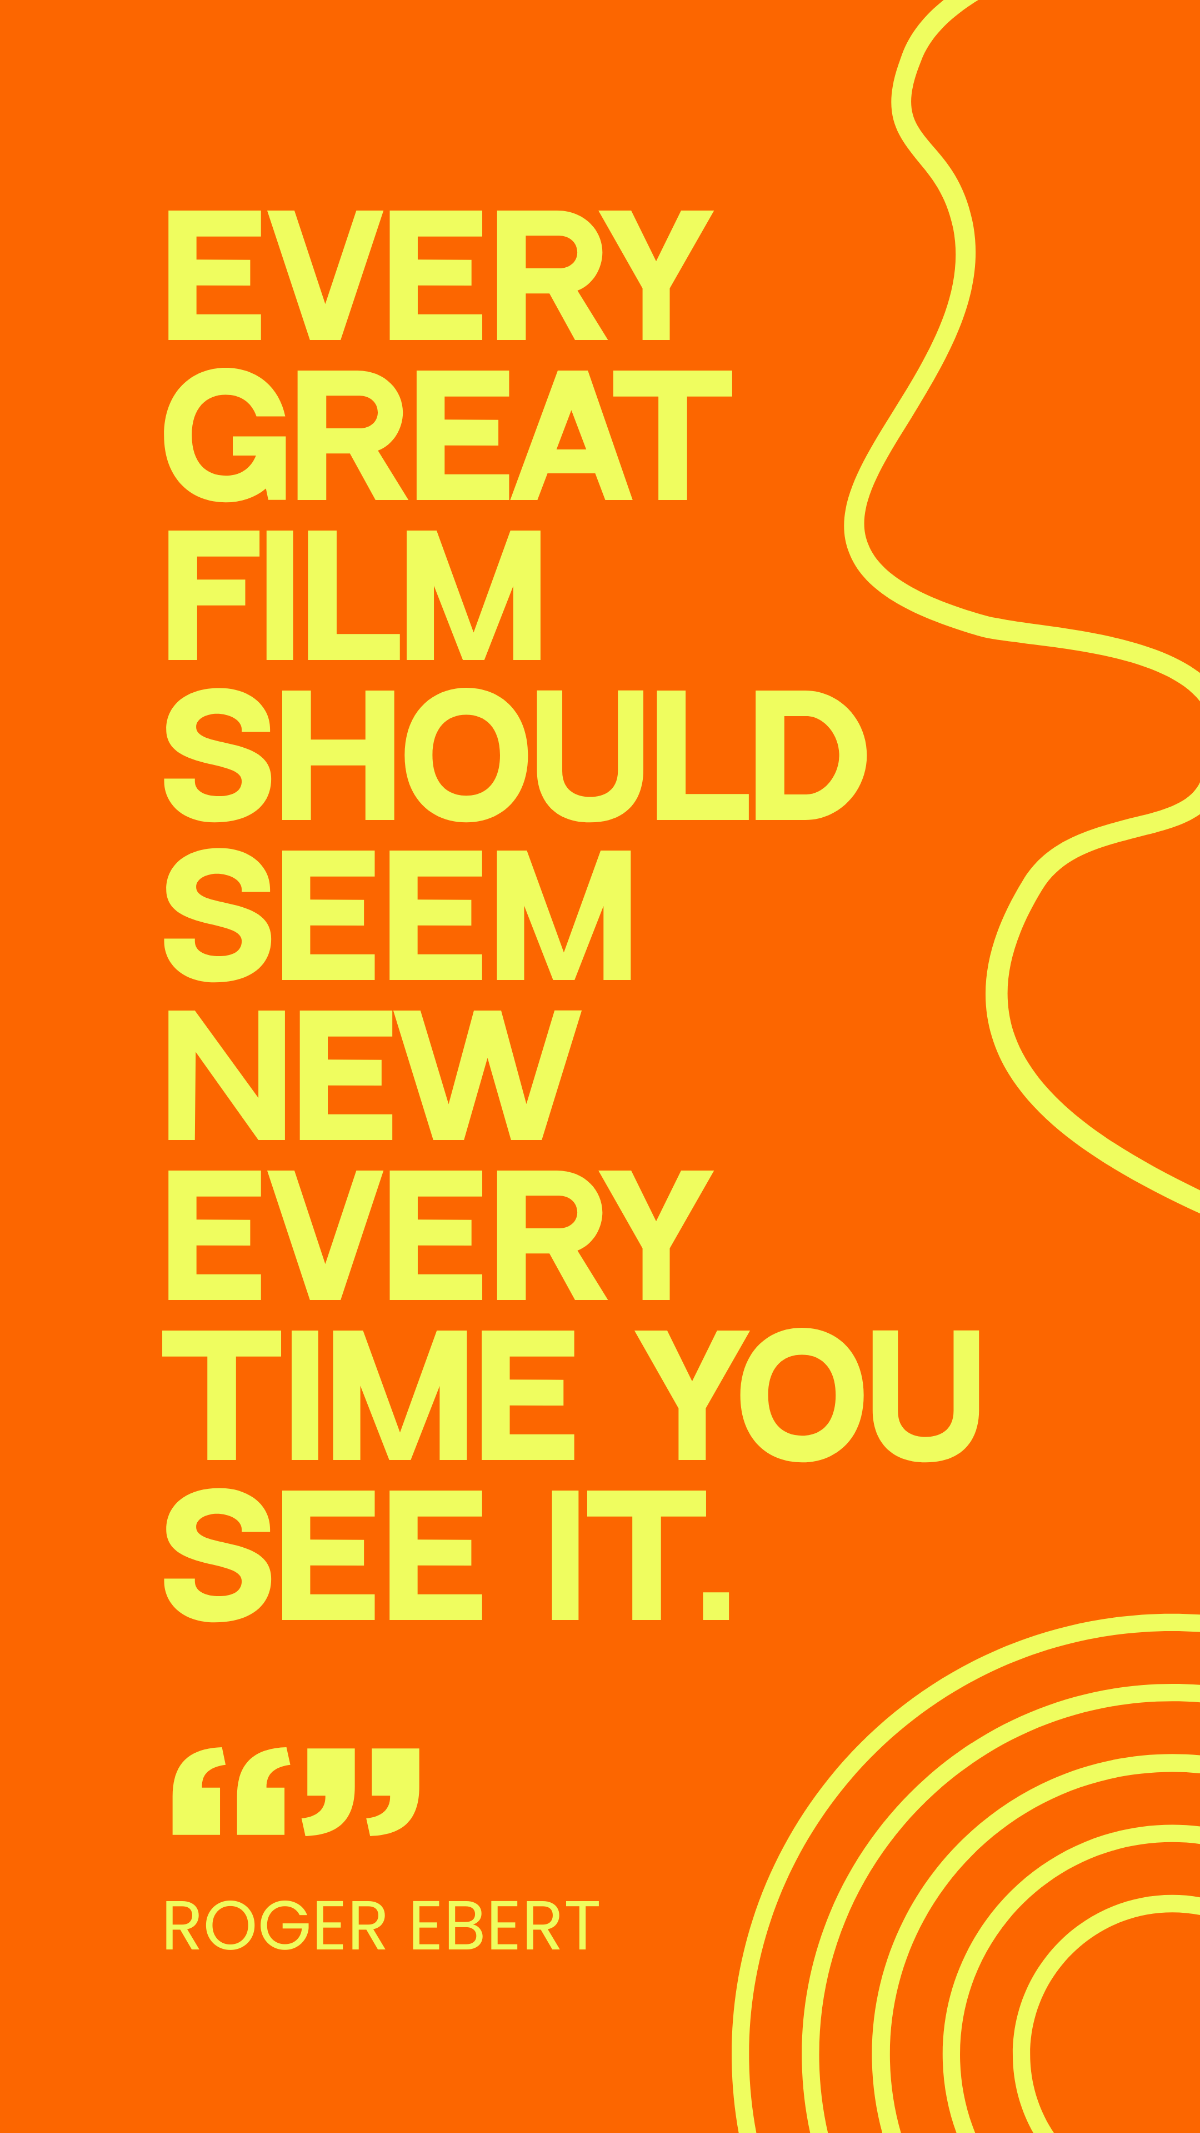 Roger Ebert - Every great film should seem new every time you see it. Template